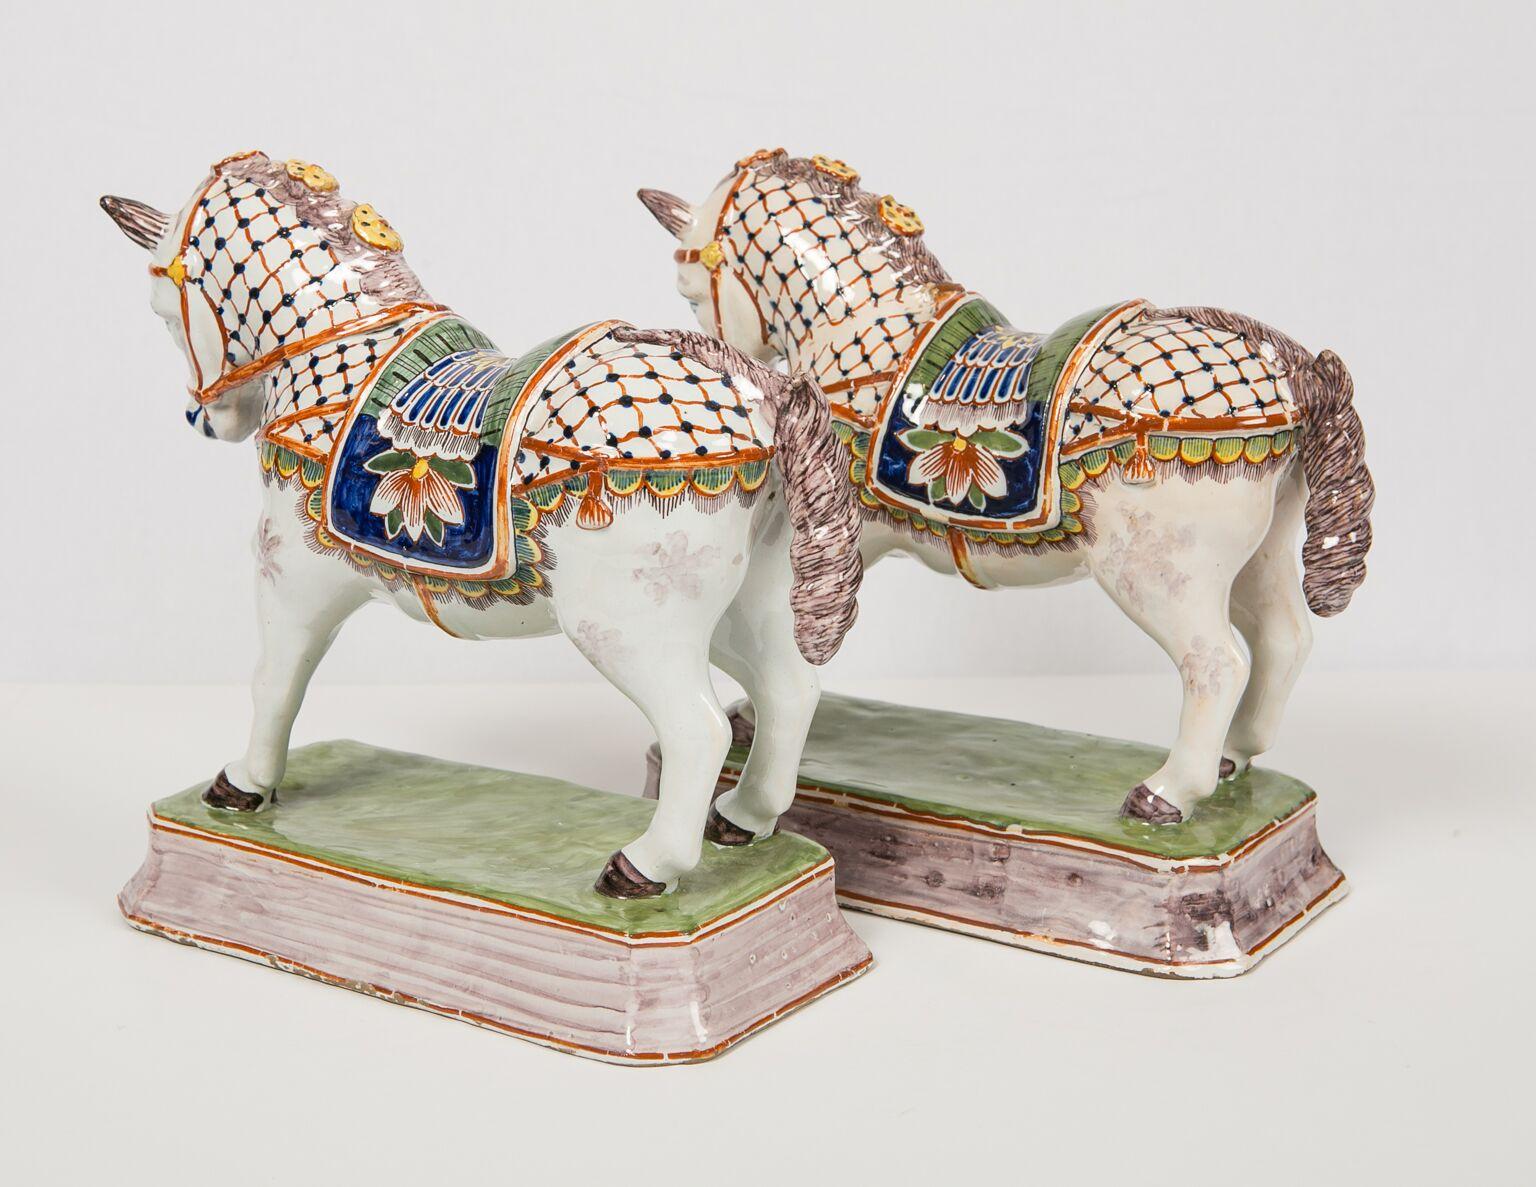 Late 19th Century Pair of Dutch Delft Horses Painted in Polychrome Colors Made, Mid-19th Century